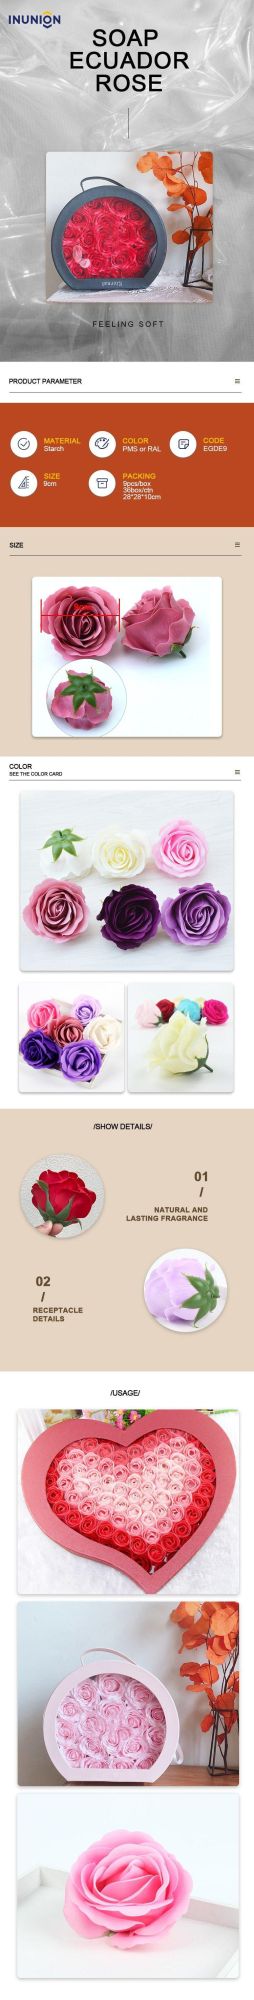 Hot Sale Big Size Soap Rose Flower Petal Lasting Women Mom Girls Birthday Valentine′s Day Mother′s Gifts